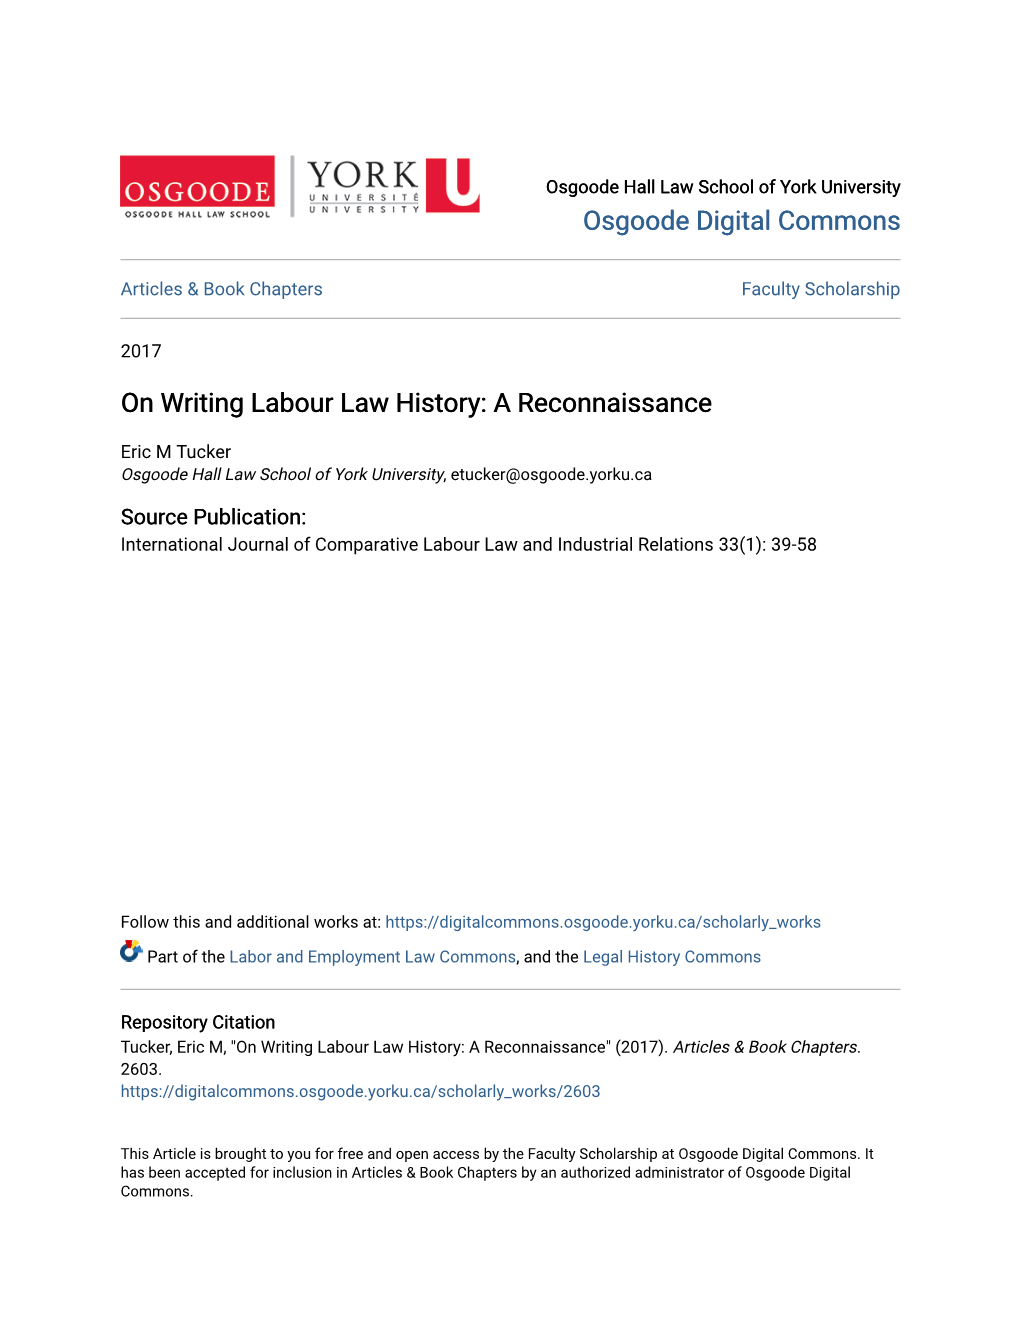 On Writing Labour Law History: a Reconnaissance